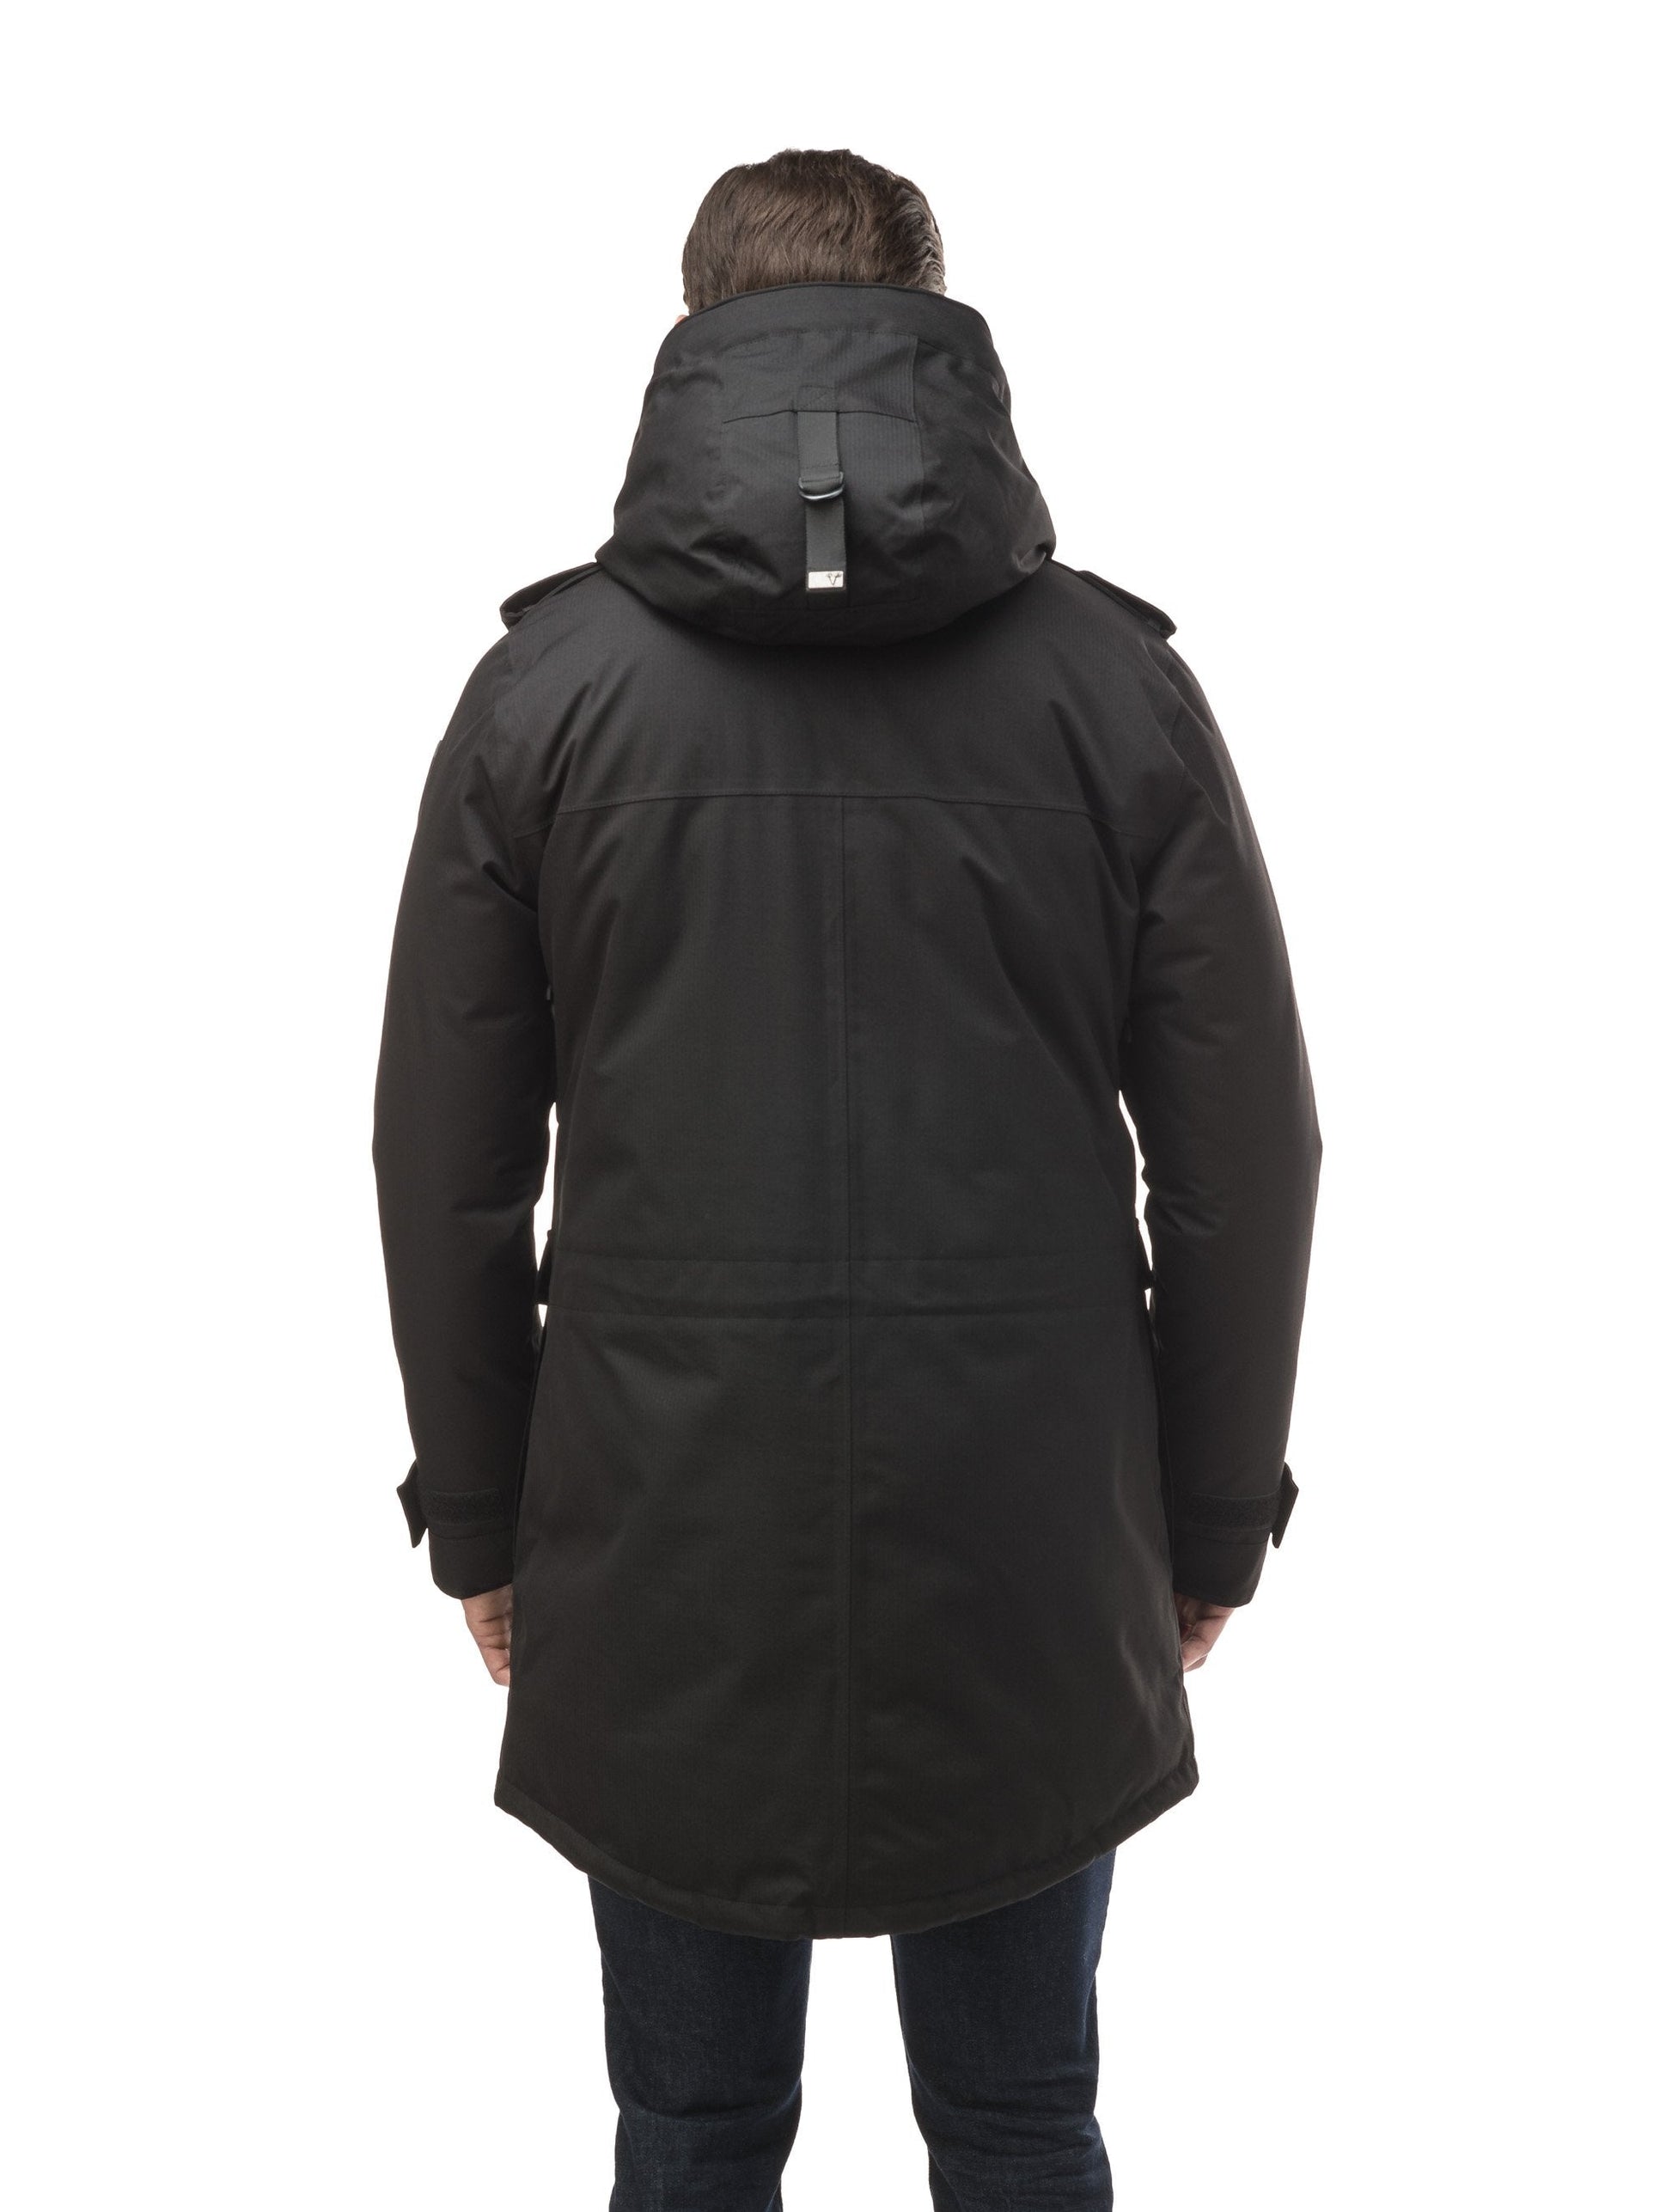 Men's down filled parka with faux button magnet closures and fur free hood with a fishtail hemline in Black